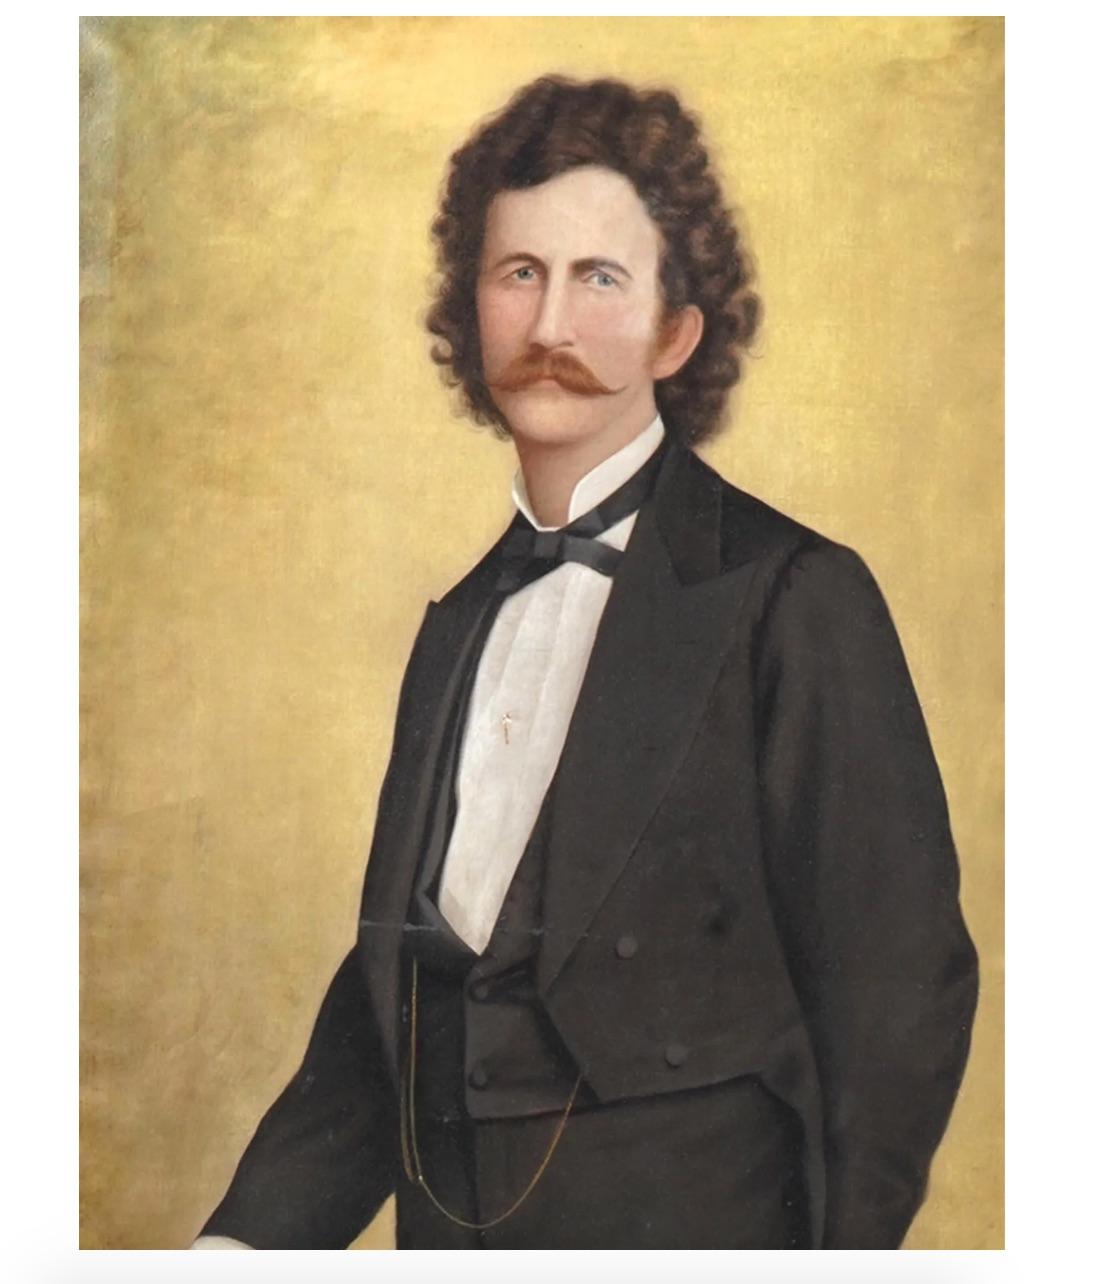 Oil on canvas painting by Warren Cushman, 1845 to 1926, an American artist based in Ohio. The artwork depicts a full-length portrait of a man in a three-piece suit. Handwritten inscription on the backside: This portrait represents me about 30 years